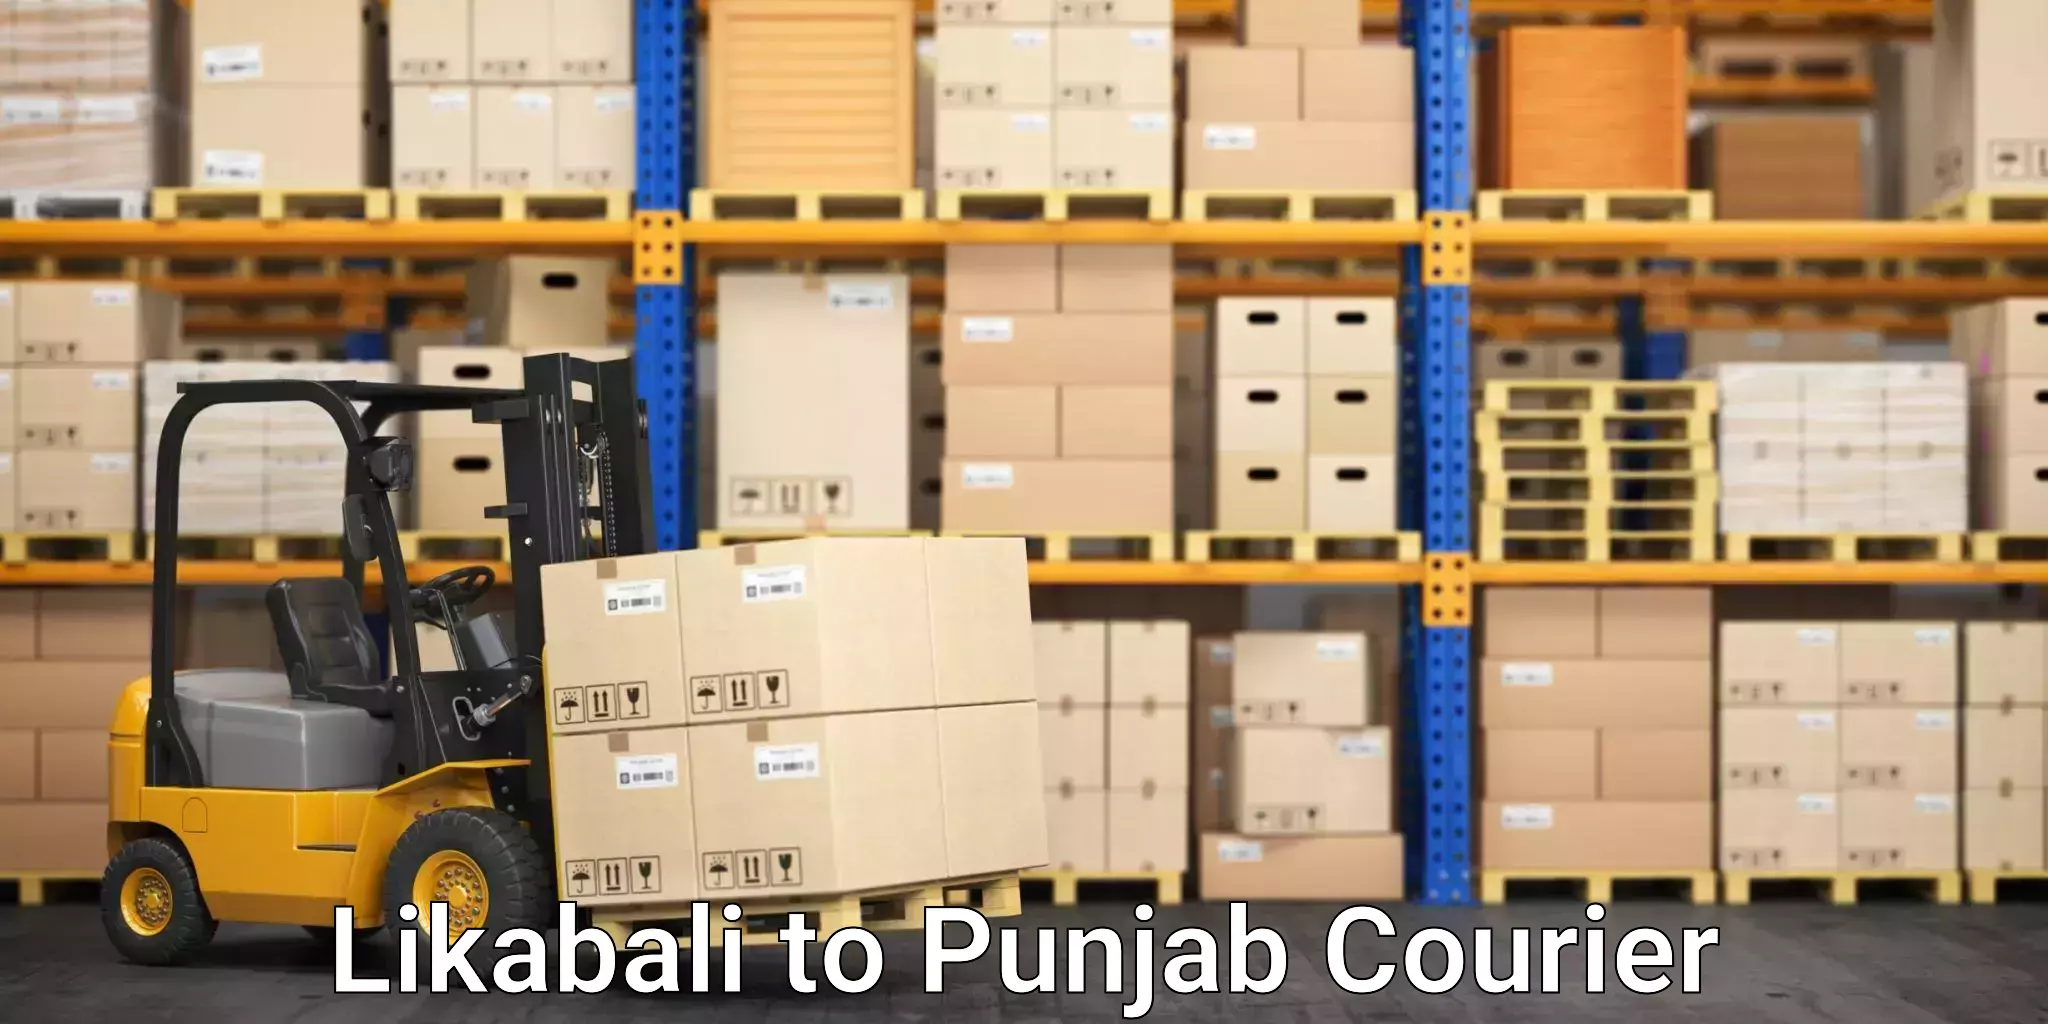 Courier service booking Likabali to Punjab